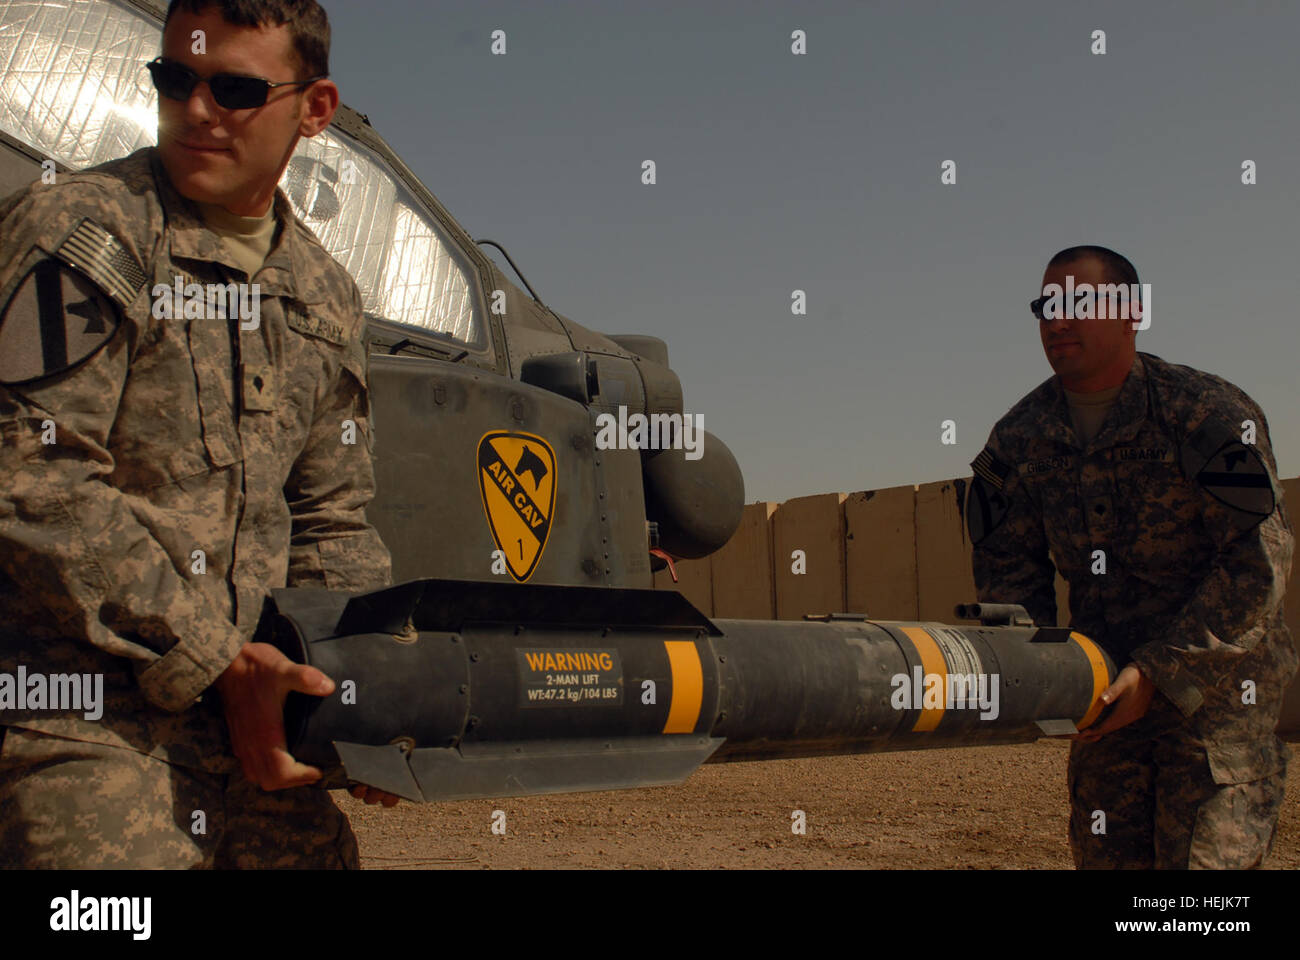 US Army 52454 CAMP TAJI, Iraq - Spc. Scott Shaver, of Austin, Texas (left)  and Spc. Bret Gibson, of Wichita, Kan., haul a Hellfire missile to load  onto the mounting bracket of